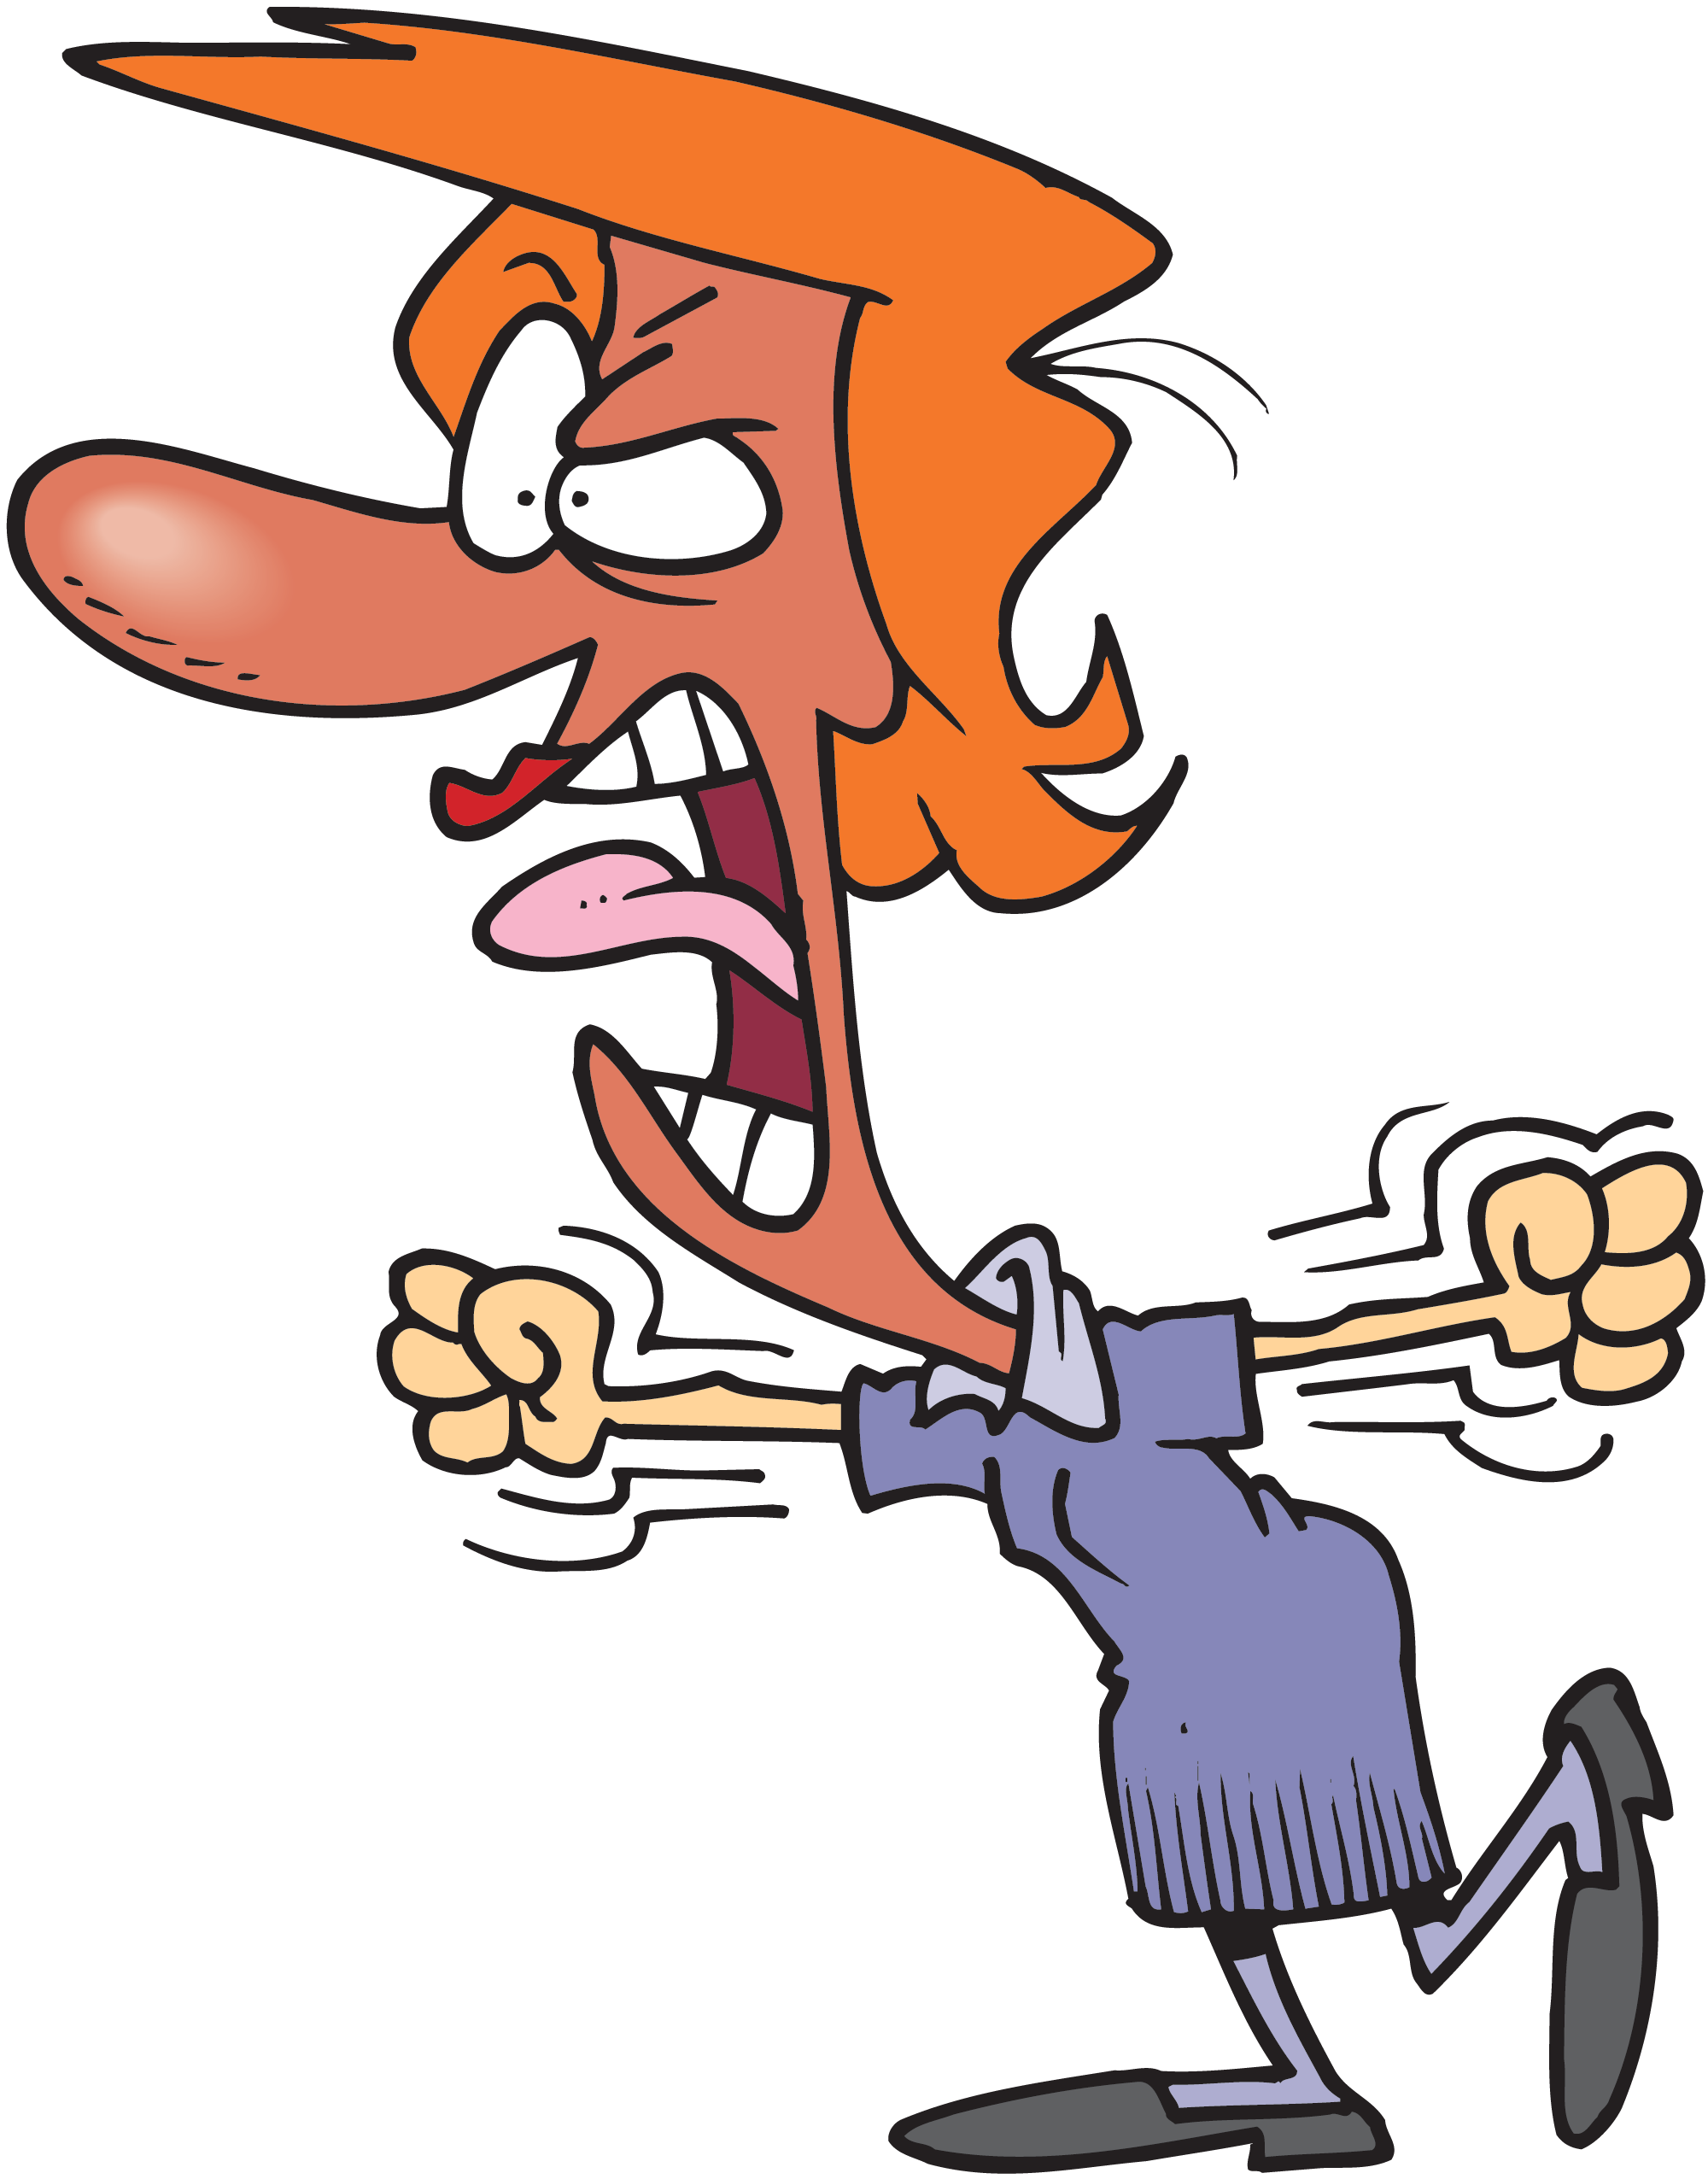 Anger cartoon woman screaming. Lime clipart angry